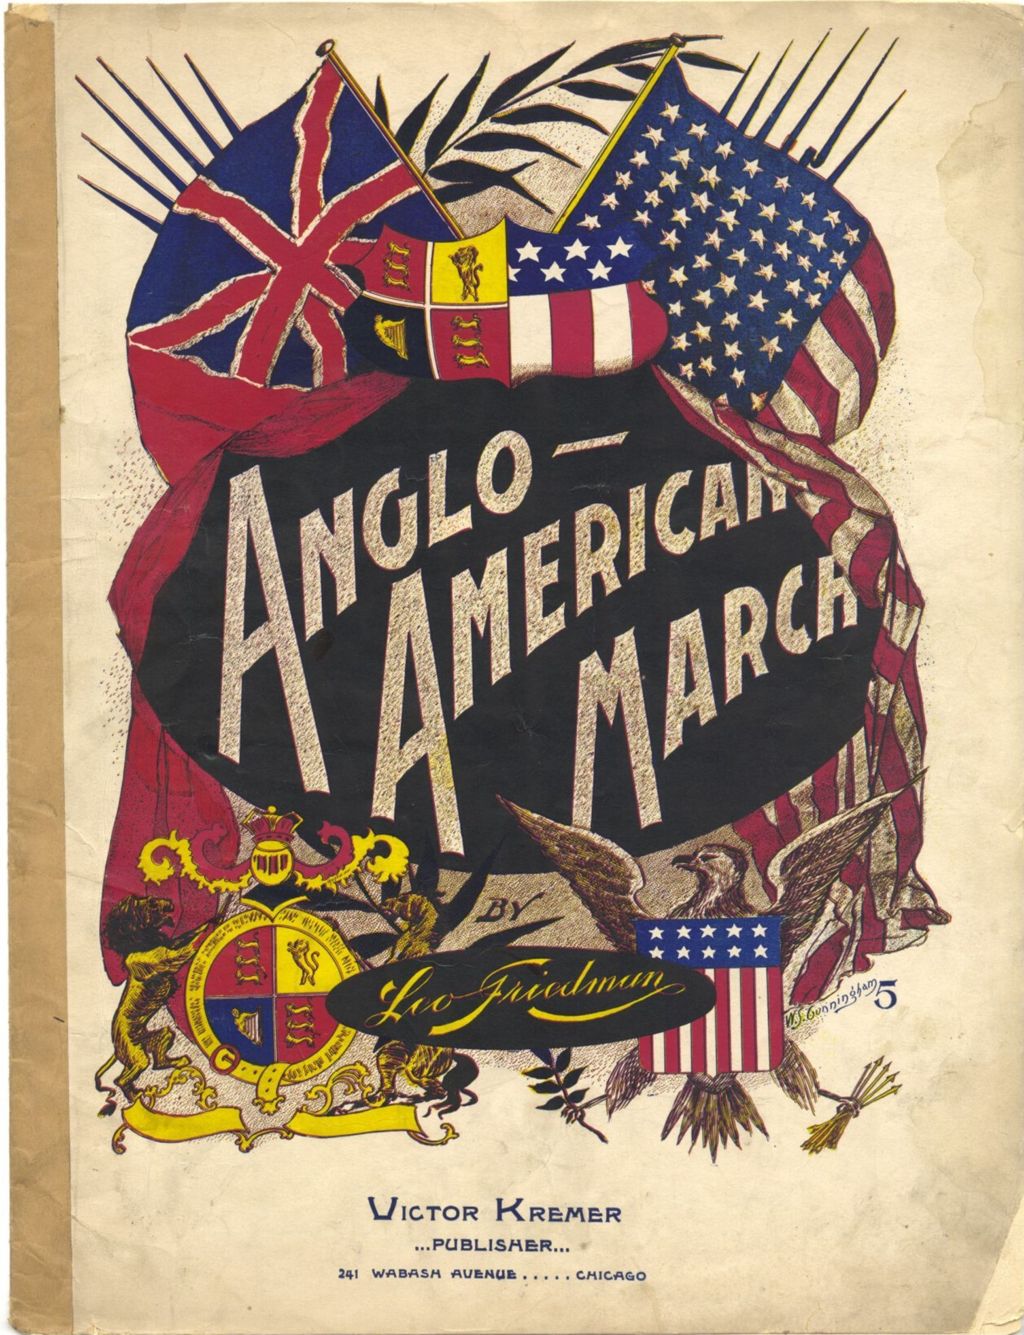 Anglo-American (March and Two Step)